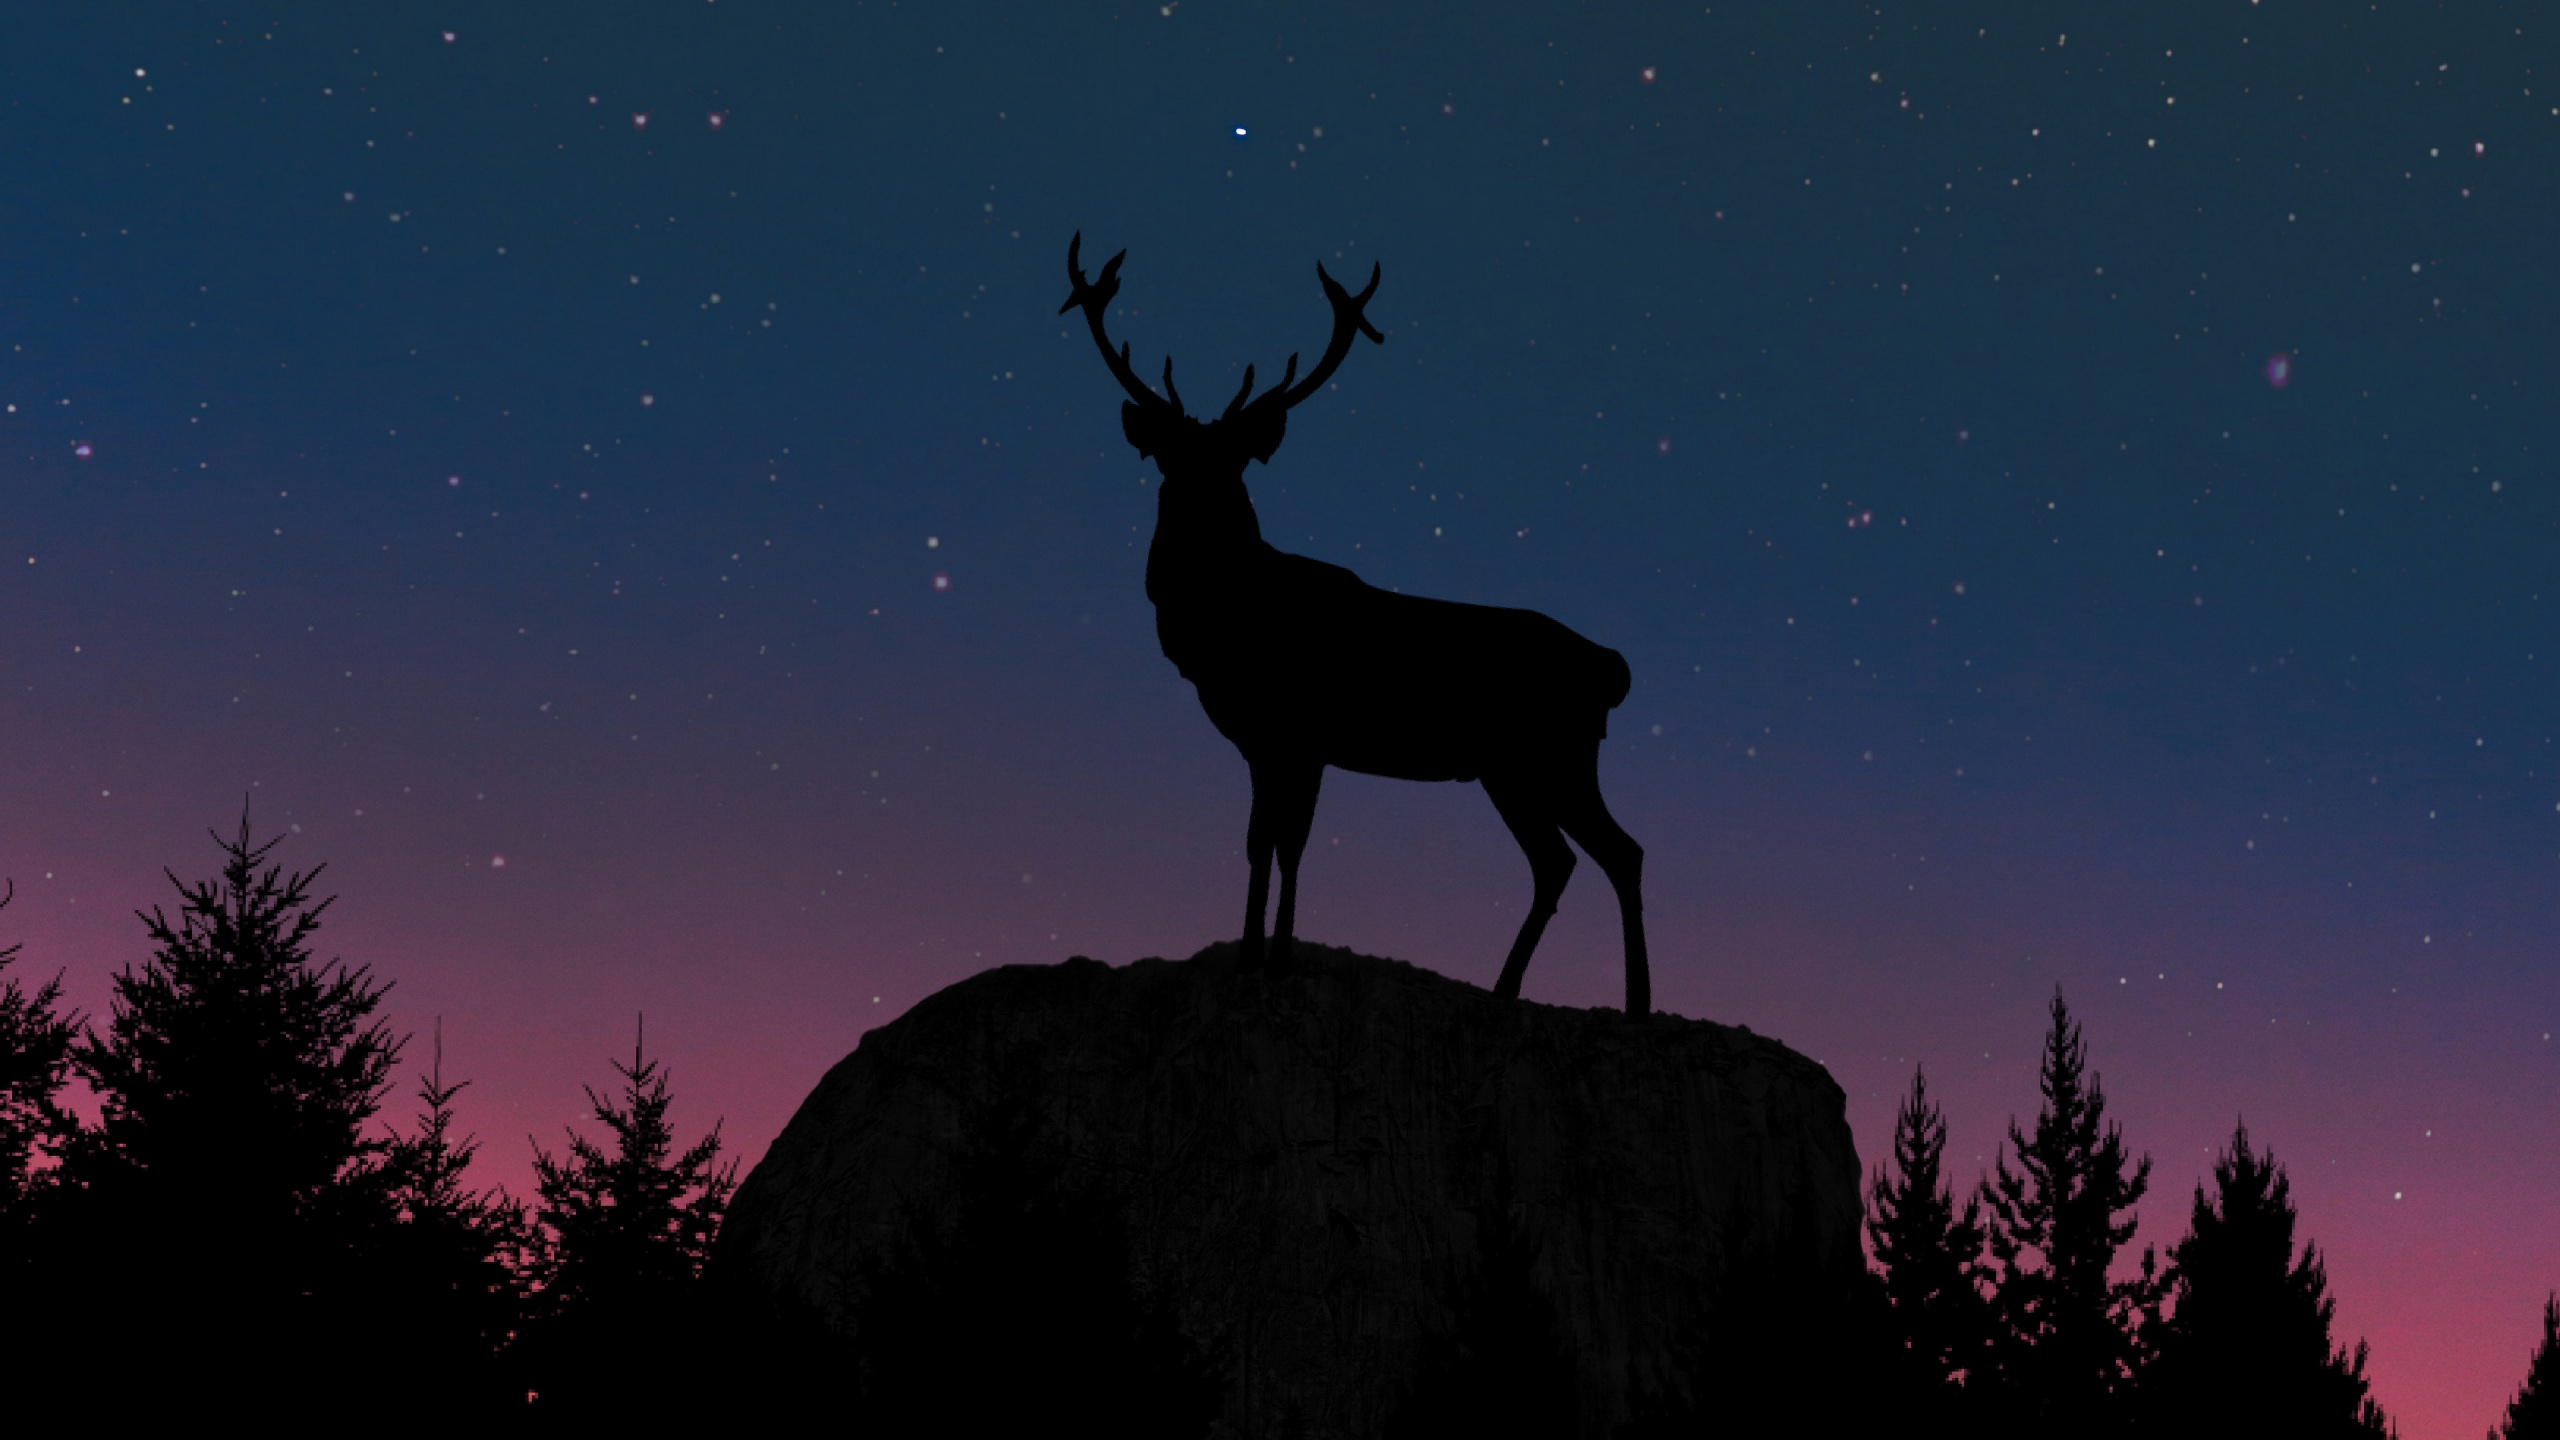 Brown Deer Standing on Rock During Night Time. Wallpaper in 2560x1440 Resolution